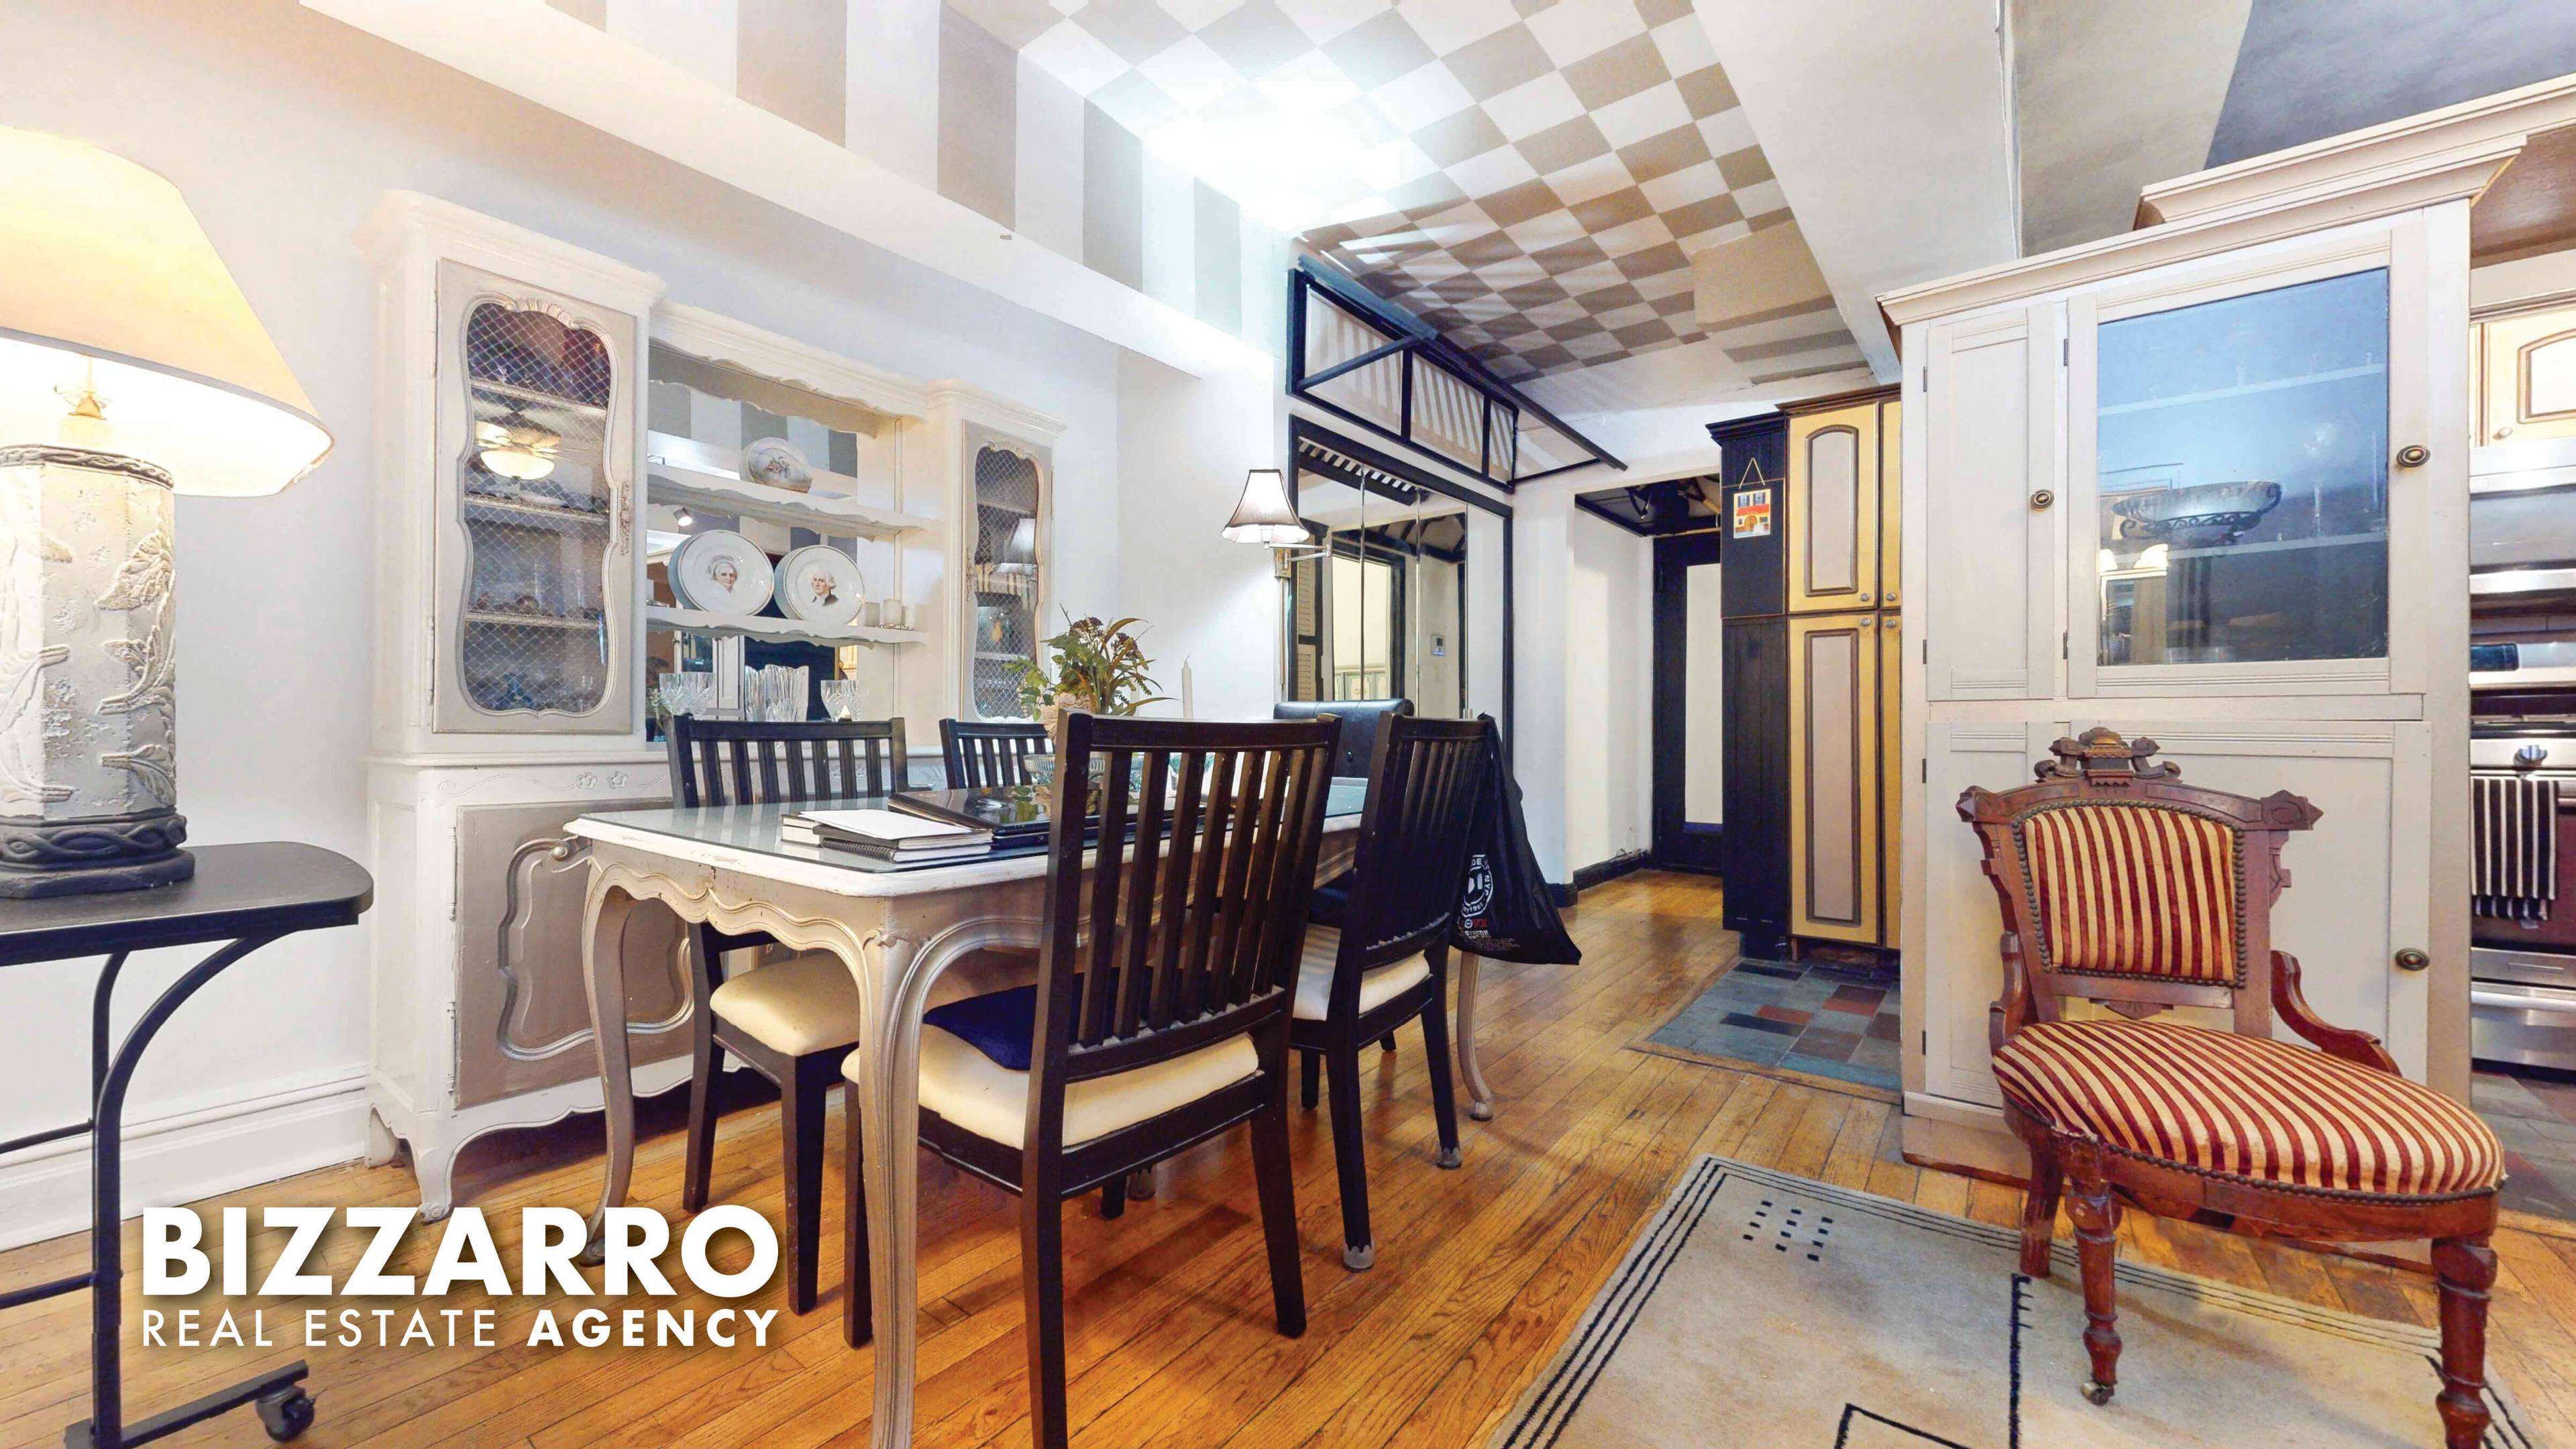 Loaded with Old World charm, this one bedroom apartment offers an open concept layout as well as an unbeatable Upper West Side location across from Riverside Park and close proximity ...